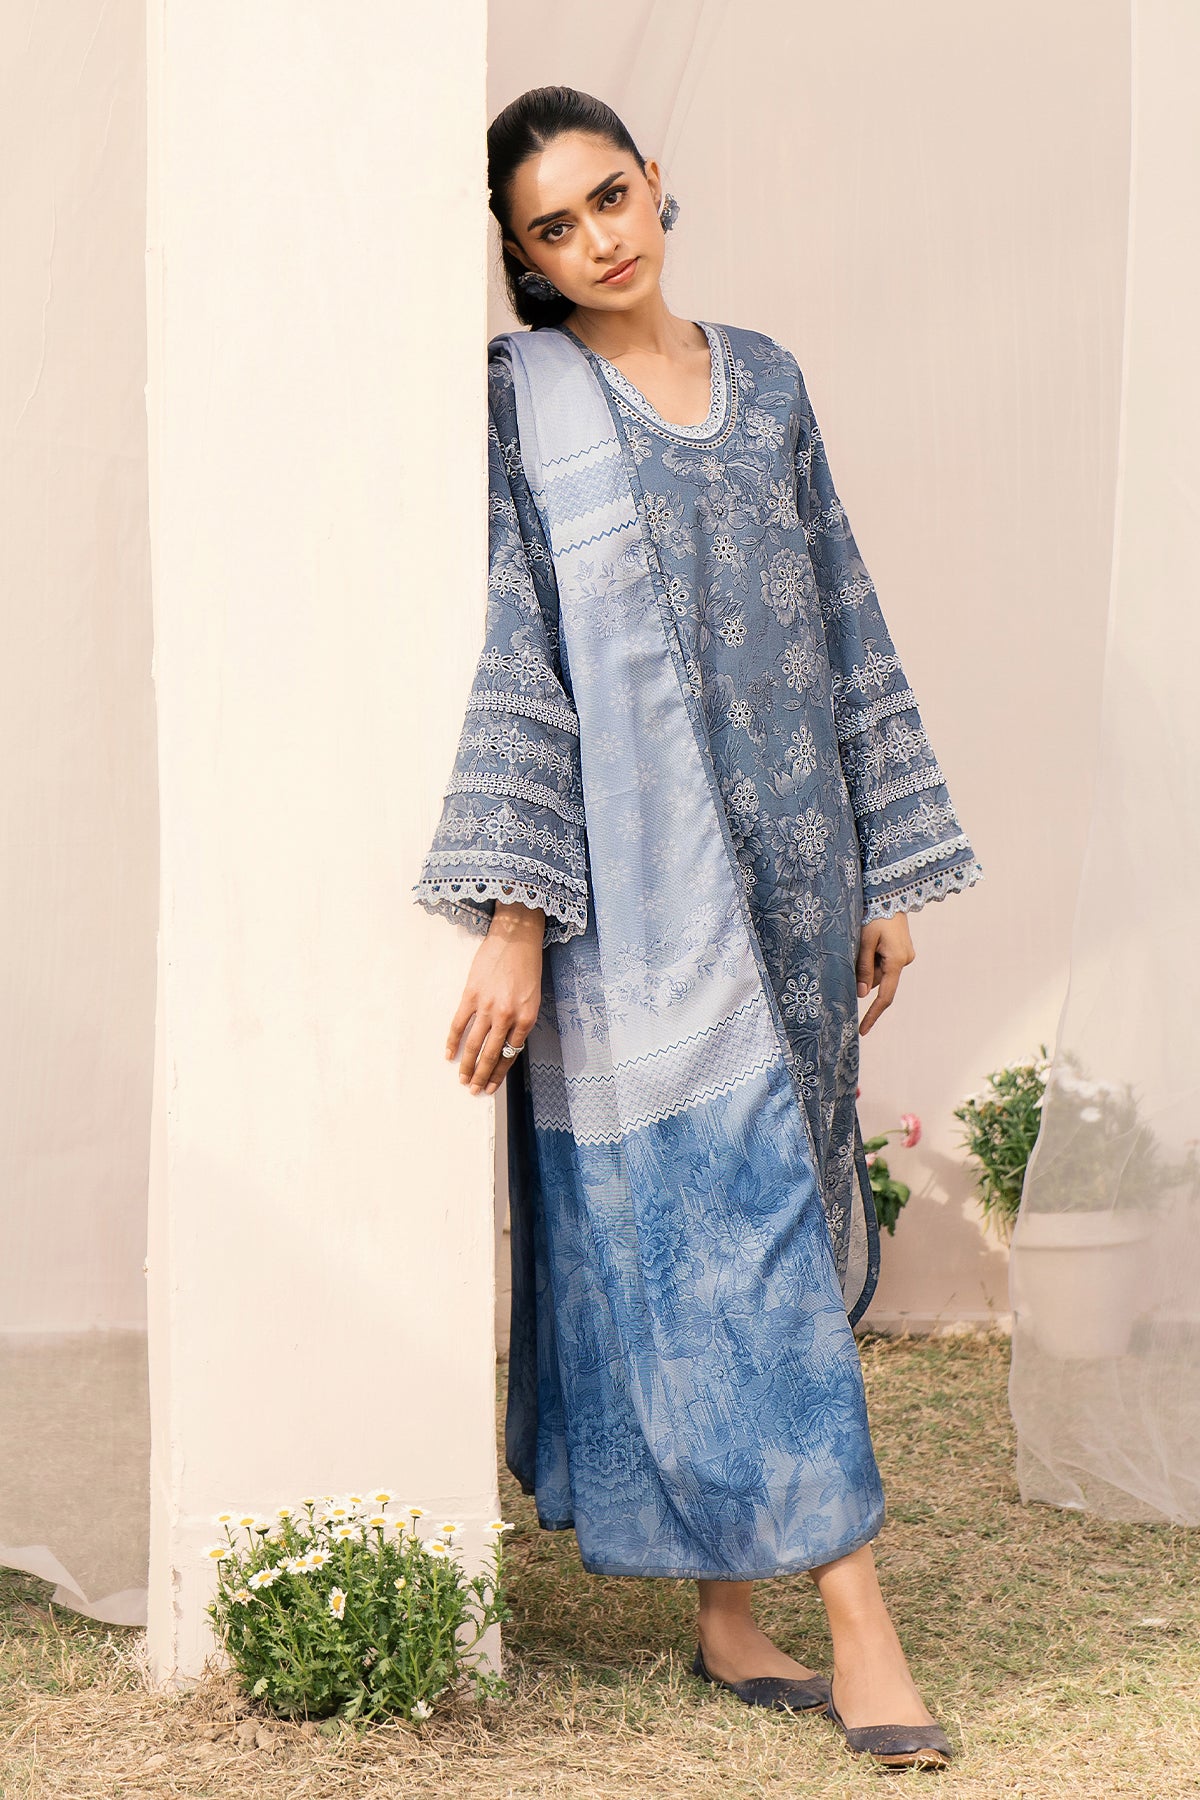 EMBROIDERED PRINTED LAWN UF-601